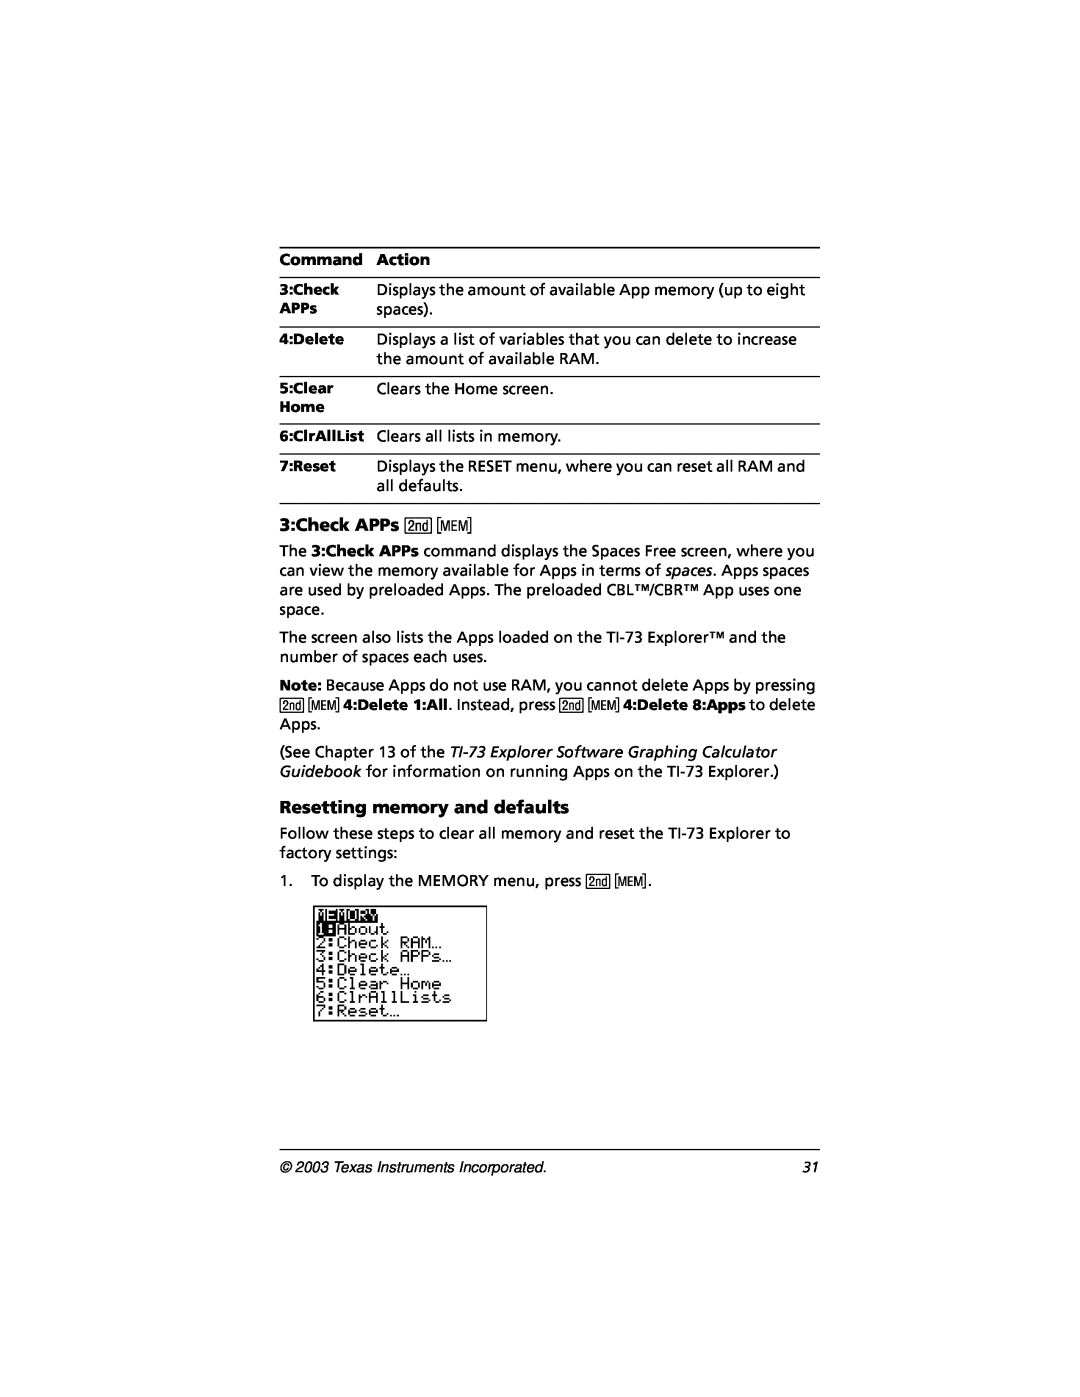 Texas Instruments CBL 2, TI-73 manual 3Check APPs -Ÿ, Resetting memory and defaults, Command Action 